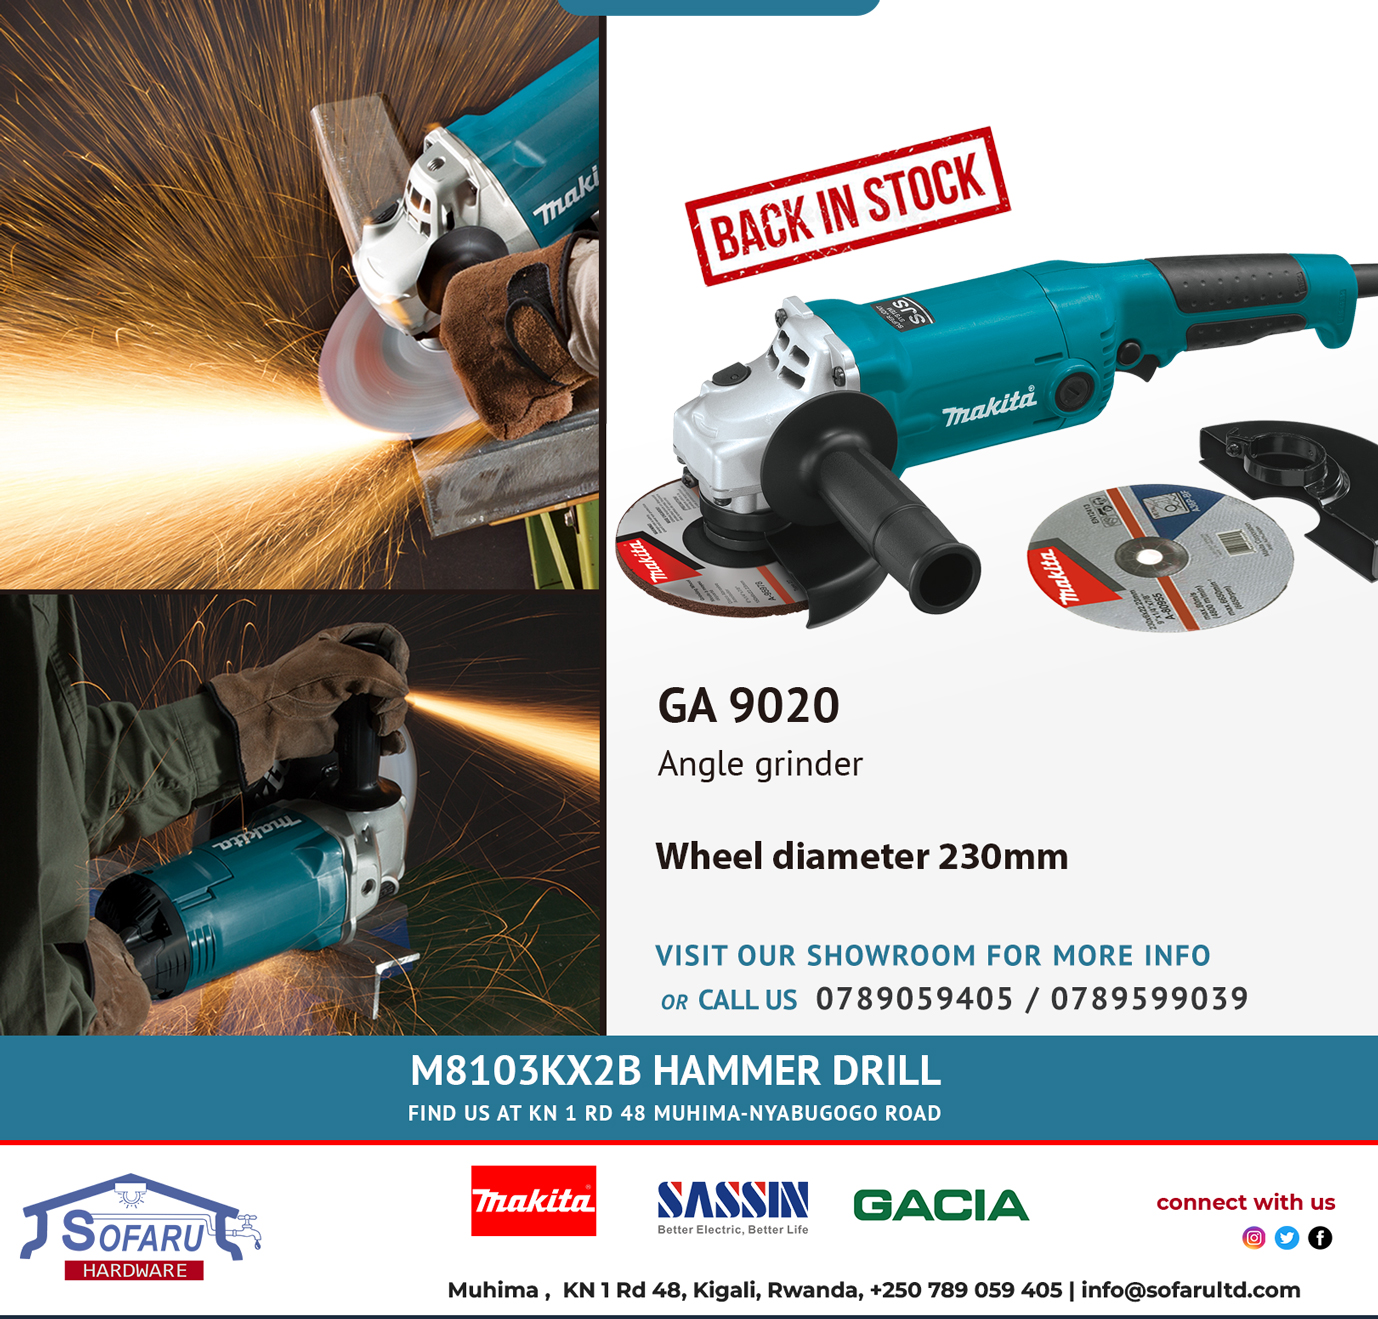 SOFARU Twitter: "Makita Angle grinders are now available. SOFARU HARDWARE is the only Distributor of MAKITA TOOLS in RWANDA. For more information, you can contact us on Tel: 0789059405